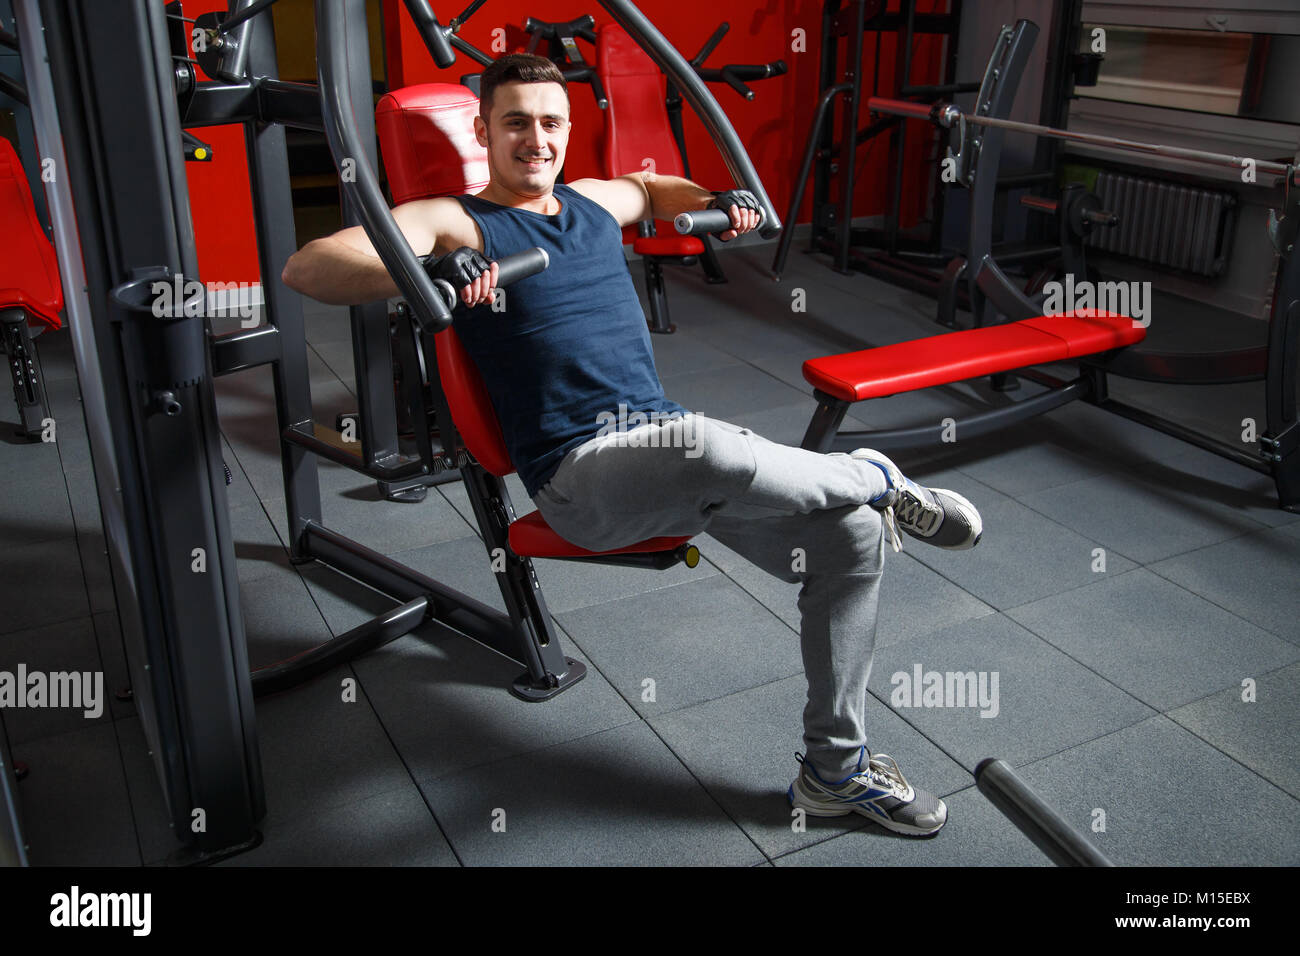 Portrait of a smiling muscular man showing thumbs up at gym Stock Photo